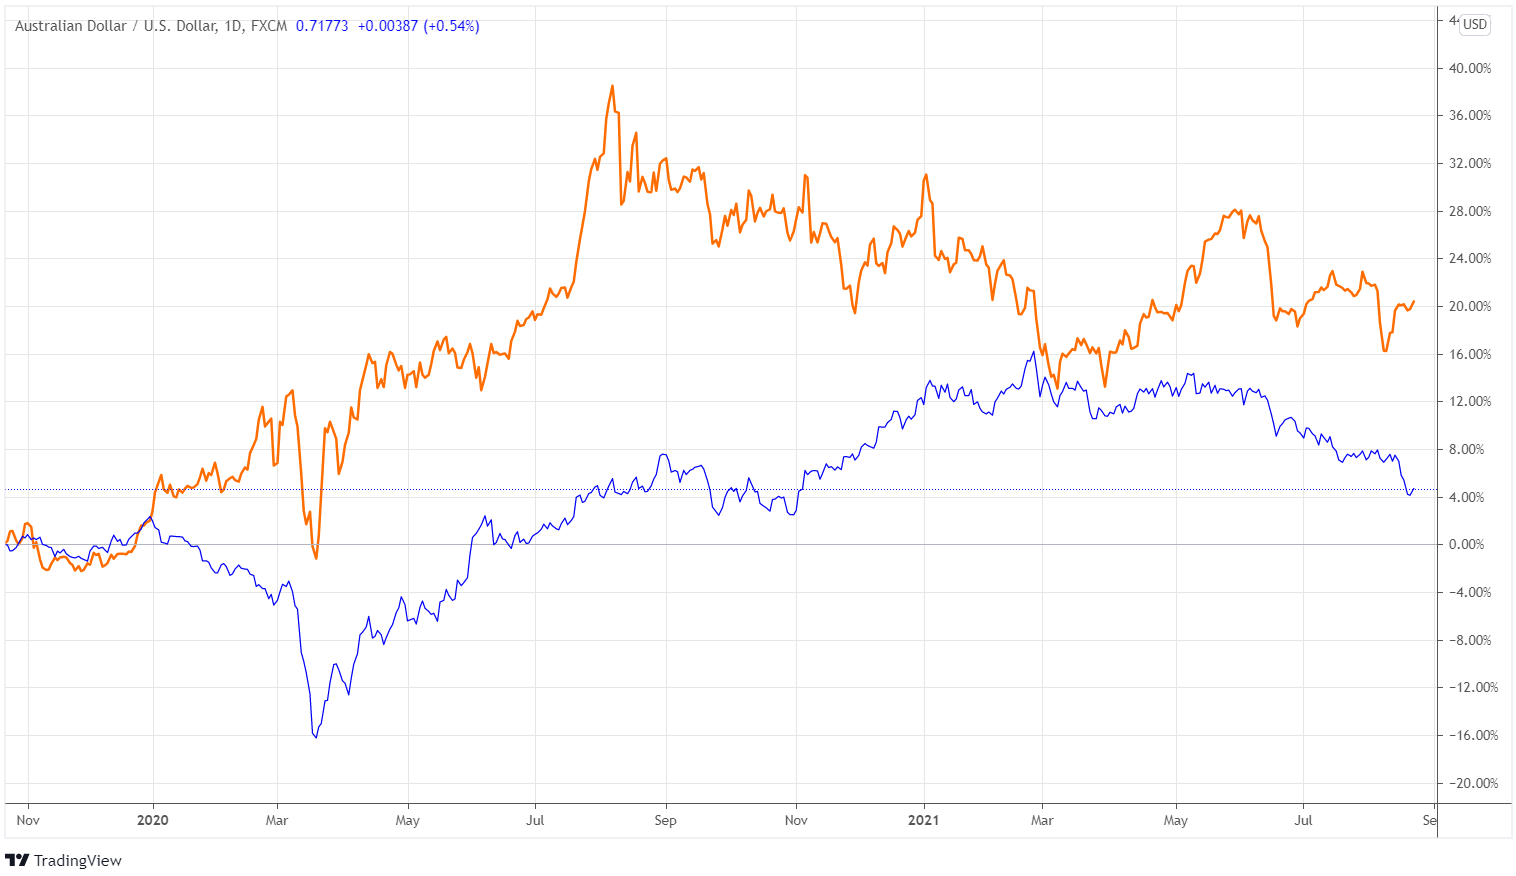 Daily chart showing the comparison between AUDUSD (Blue) and Gold (Orange).